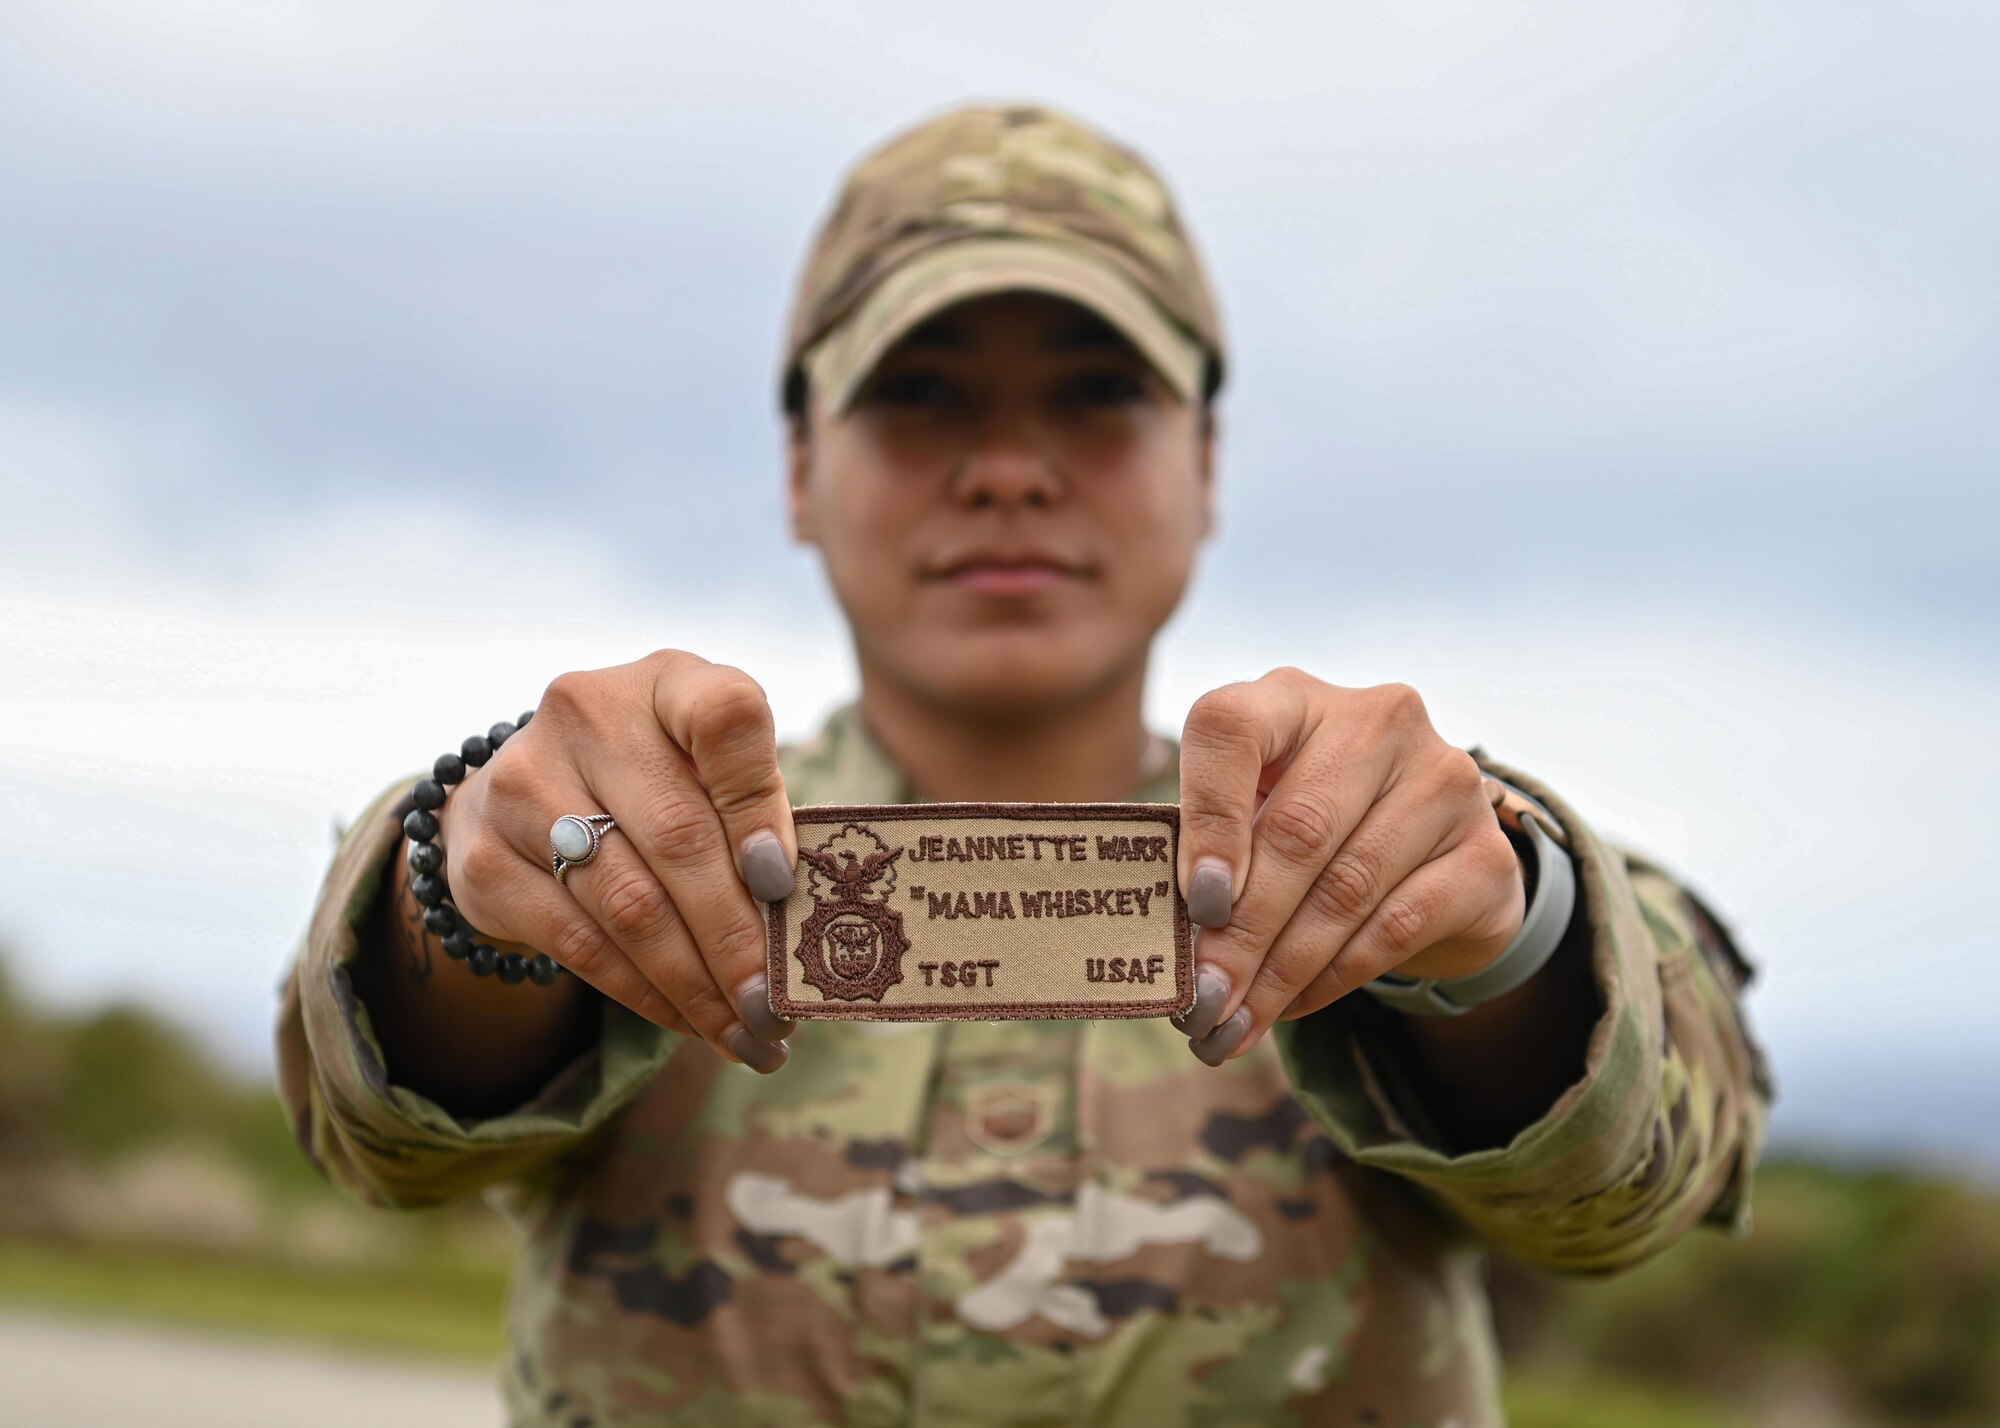 Senior Master Sgt. Jeannette Warr, 36th Wing Equal Opportunity director, proudly shows the defender patch she once wore before retraining in 2014, at Andersen Air Force Base, Guam, April 6, 2023. Warr joined the Air Force in 2004, receiving security forces as her first career specialty. Early on in her career, Warr realized there was no female representation at any level within the security forces career field and she decided she wanted to be the change her career field needed. (U.S. Air Force photo by Staff Sgt. Aubree Owens)